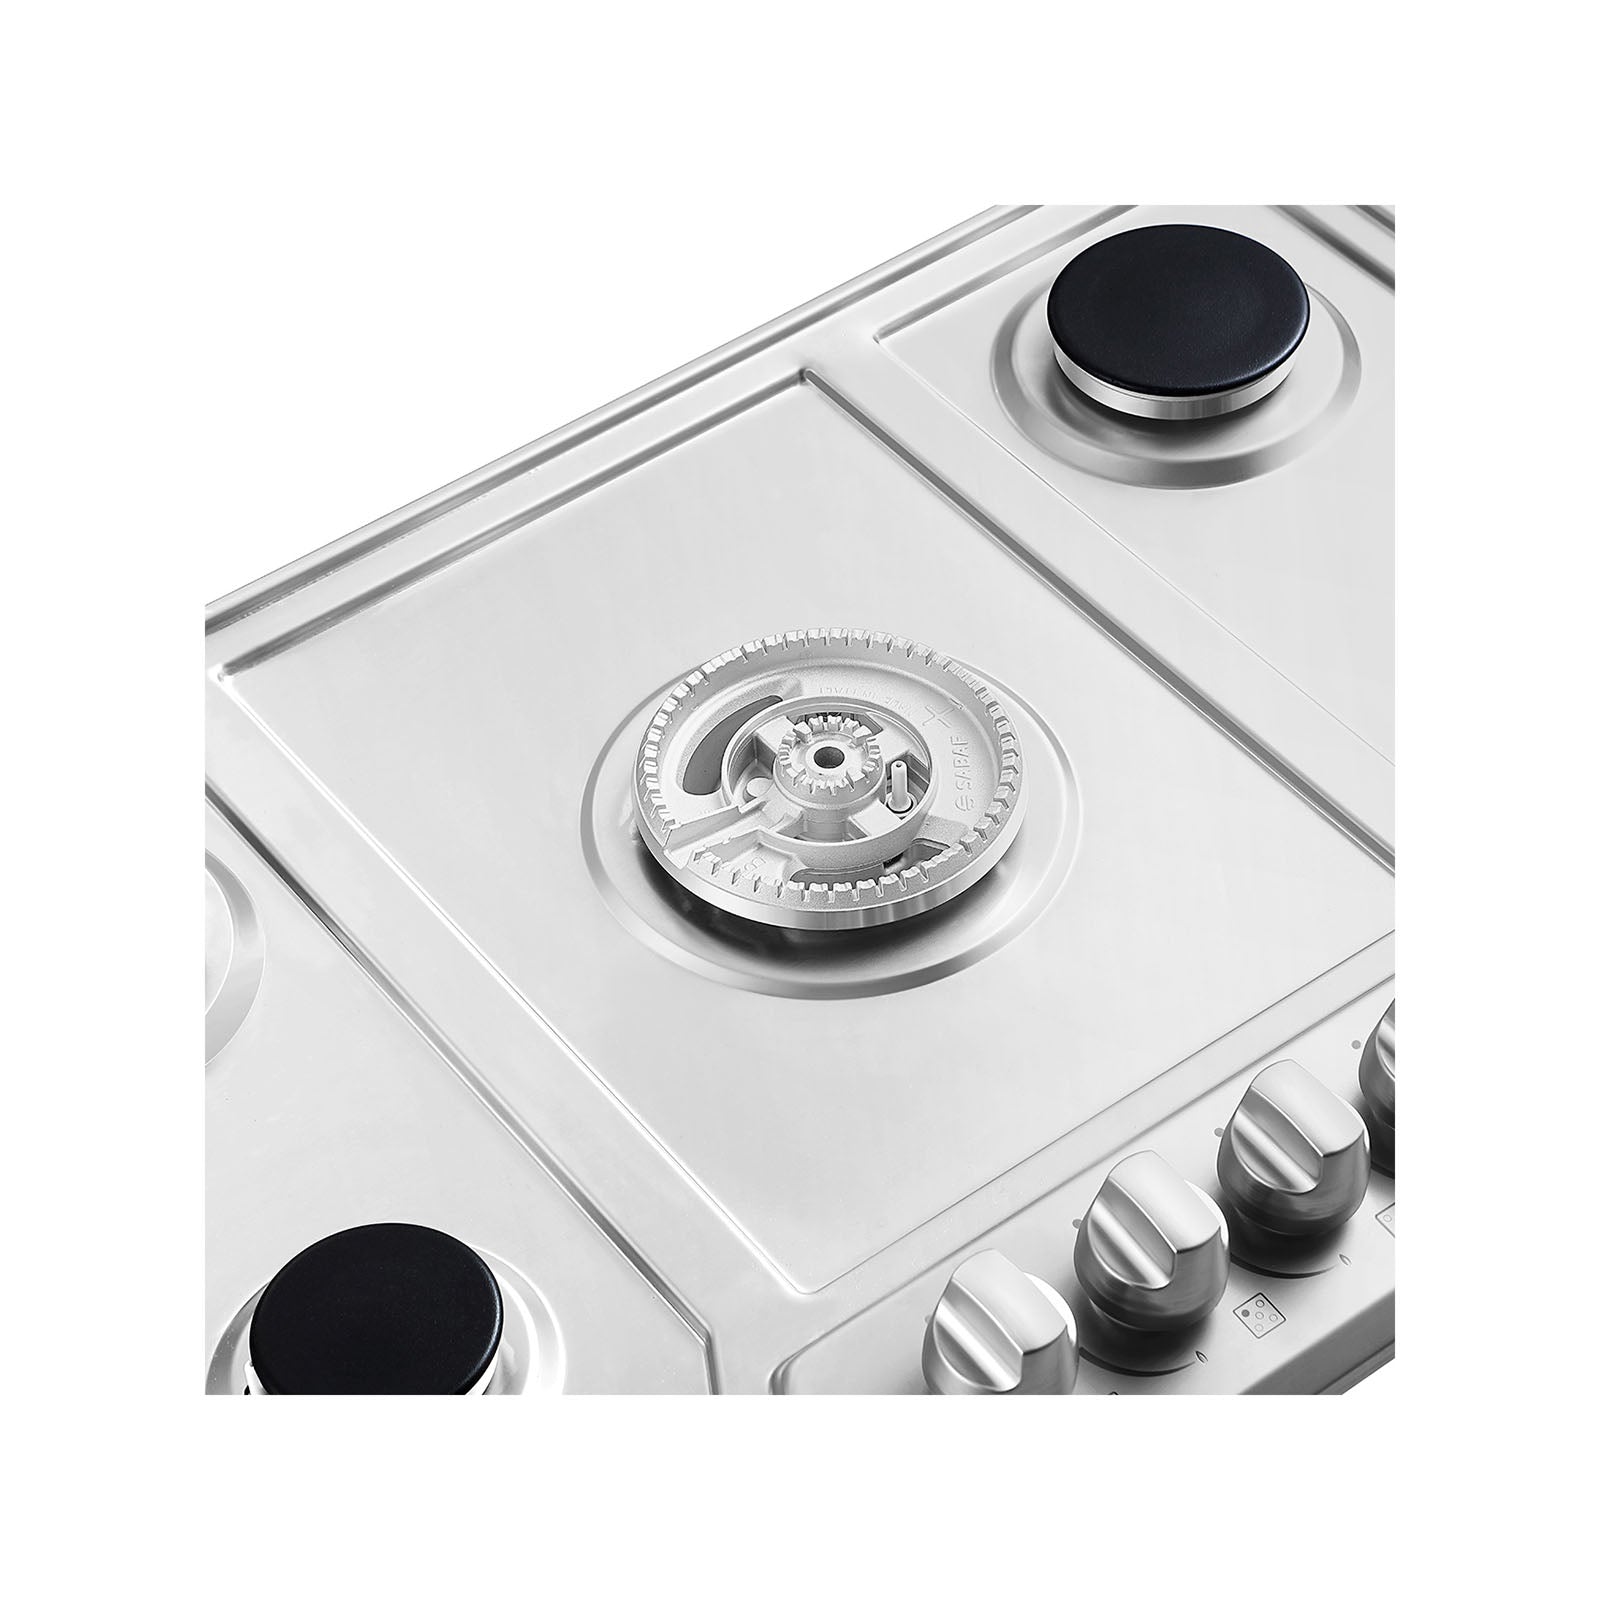 Empava 36" Built-in Gas Stove Cooktop